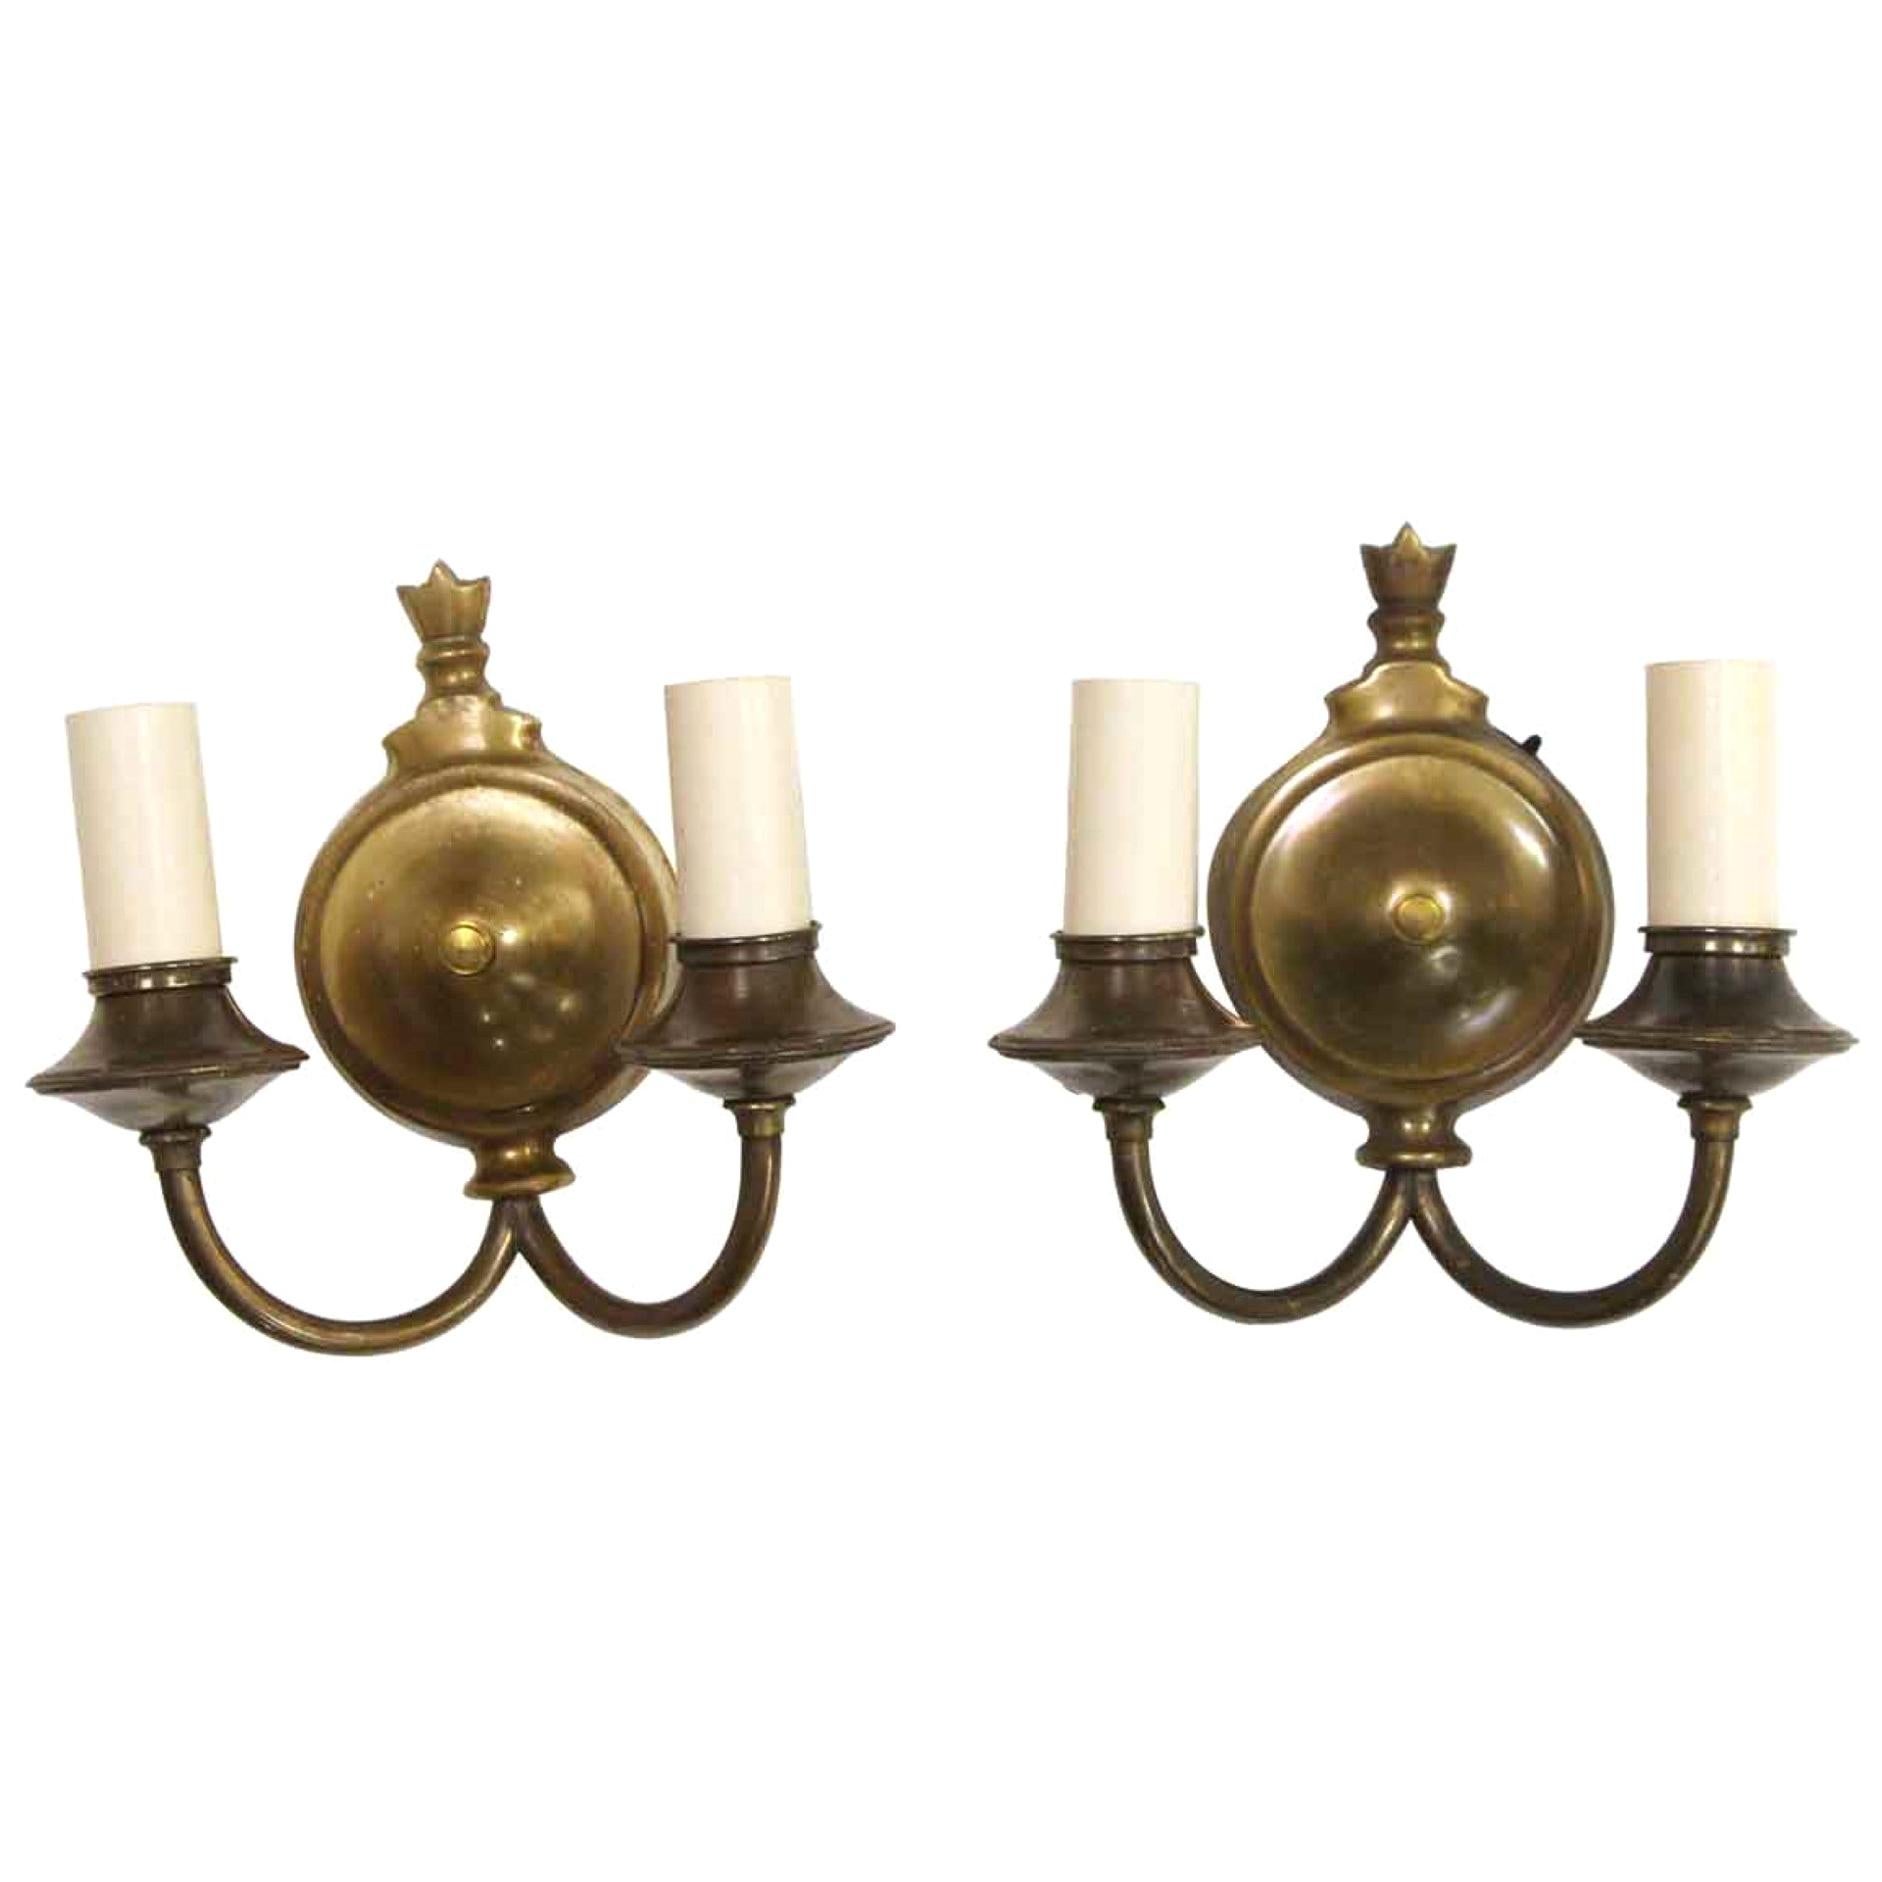 1920s Pair of Two Arm Antique Brass Finish Sconces with Short Candlesticks Qty